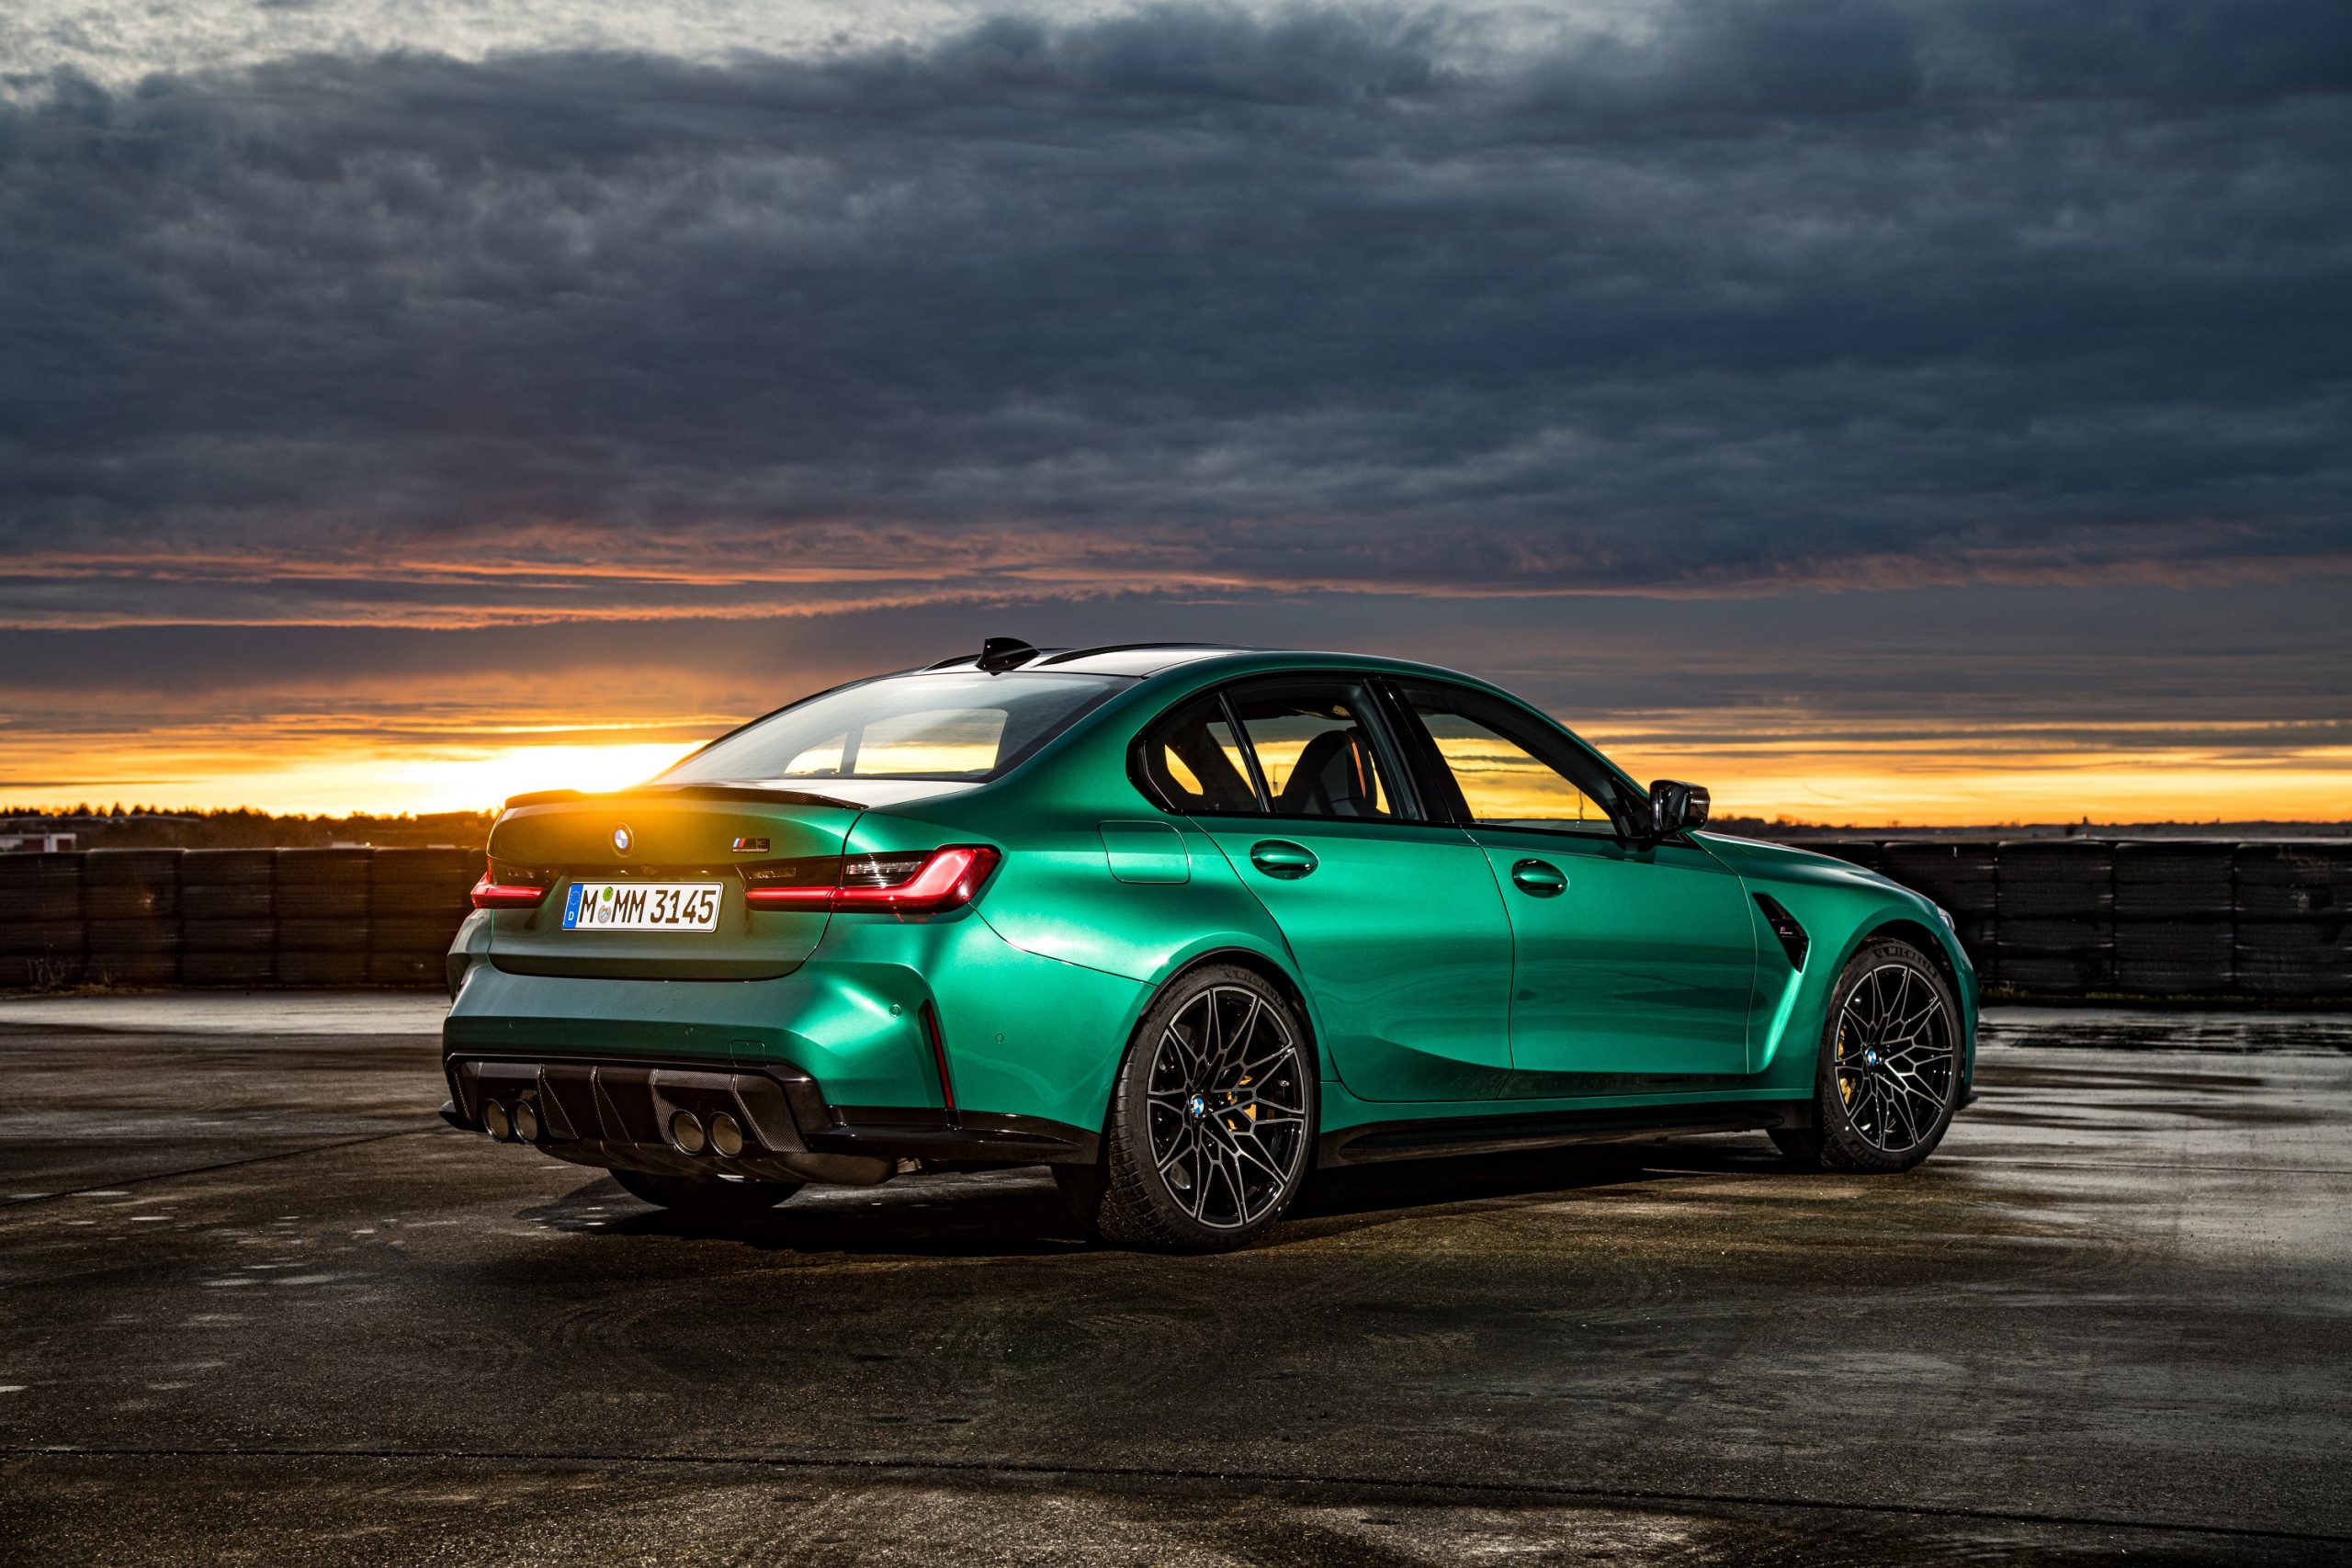 The rear 3/4 of an Isle of Man green BMW M3 shot at sunset on a runway